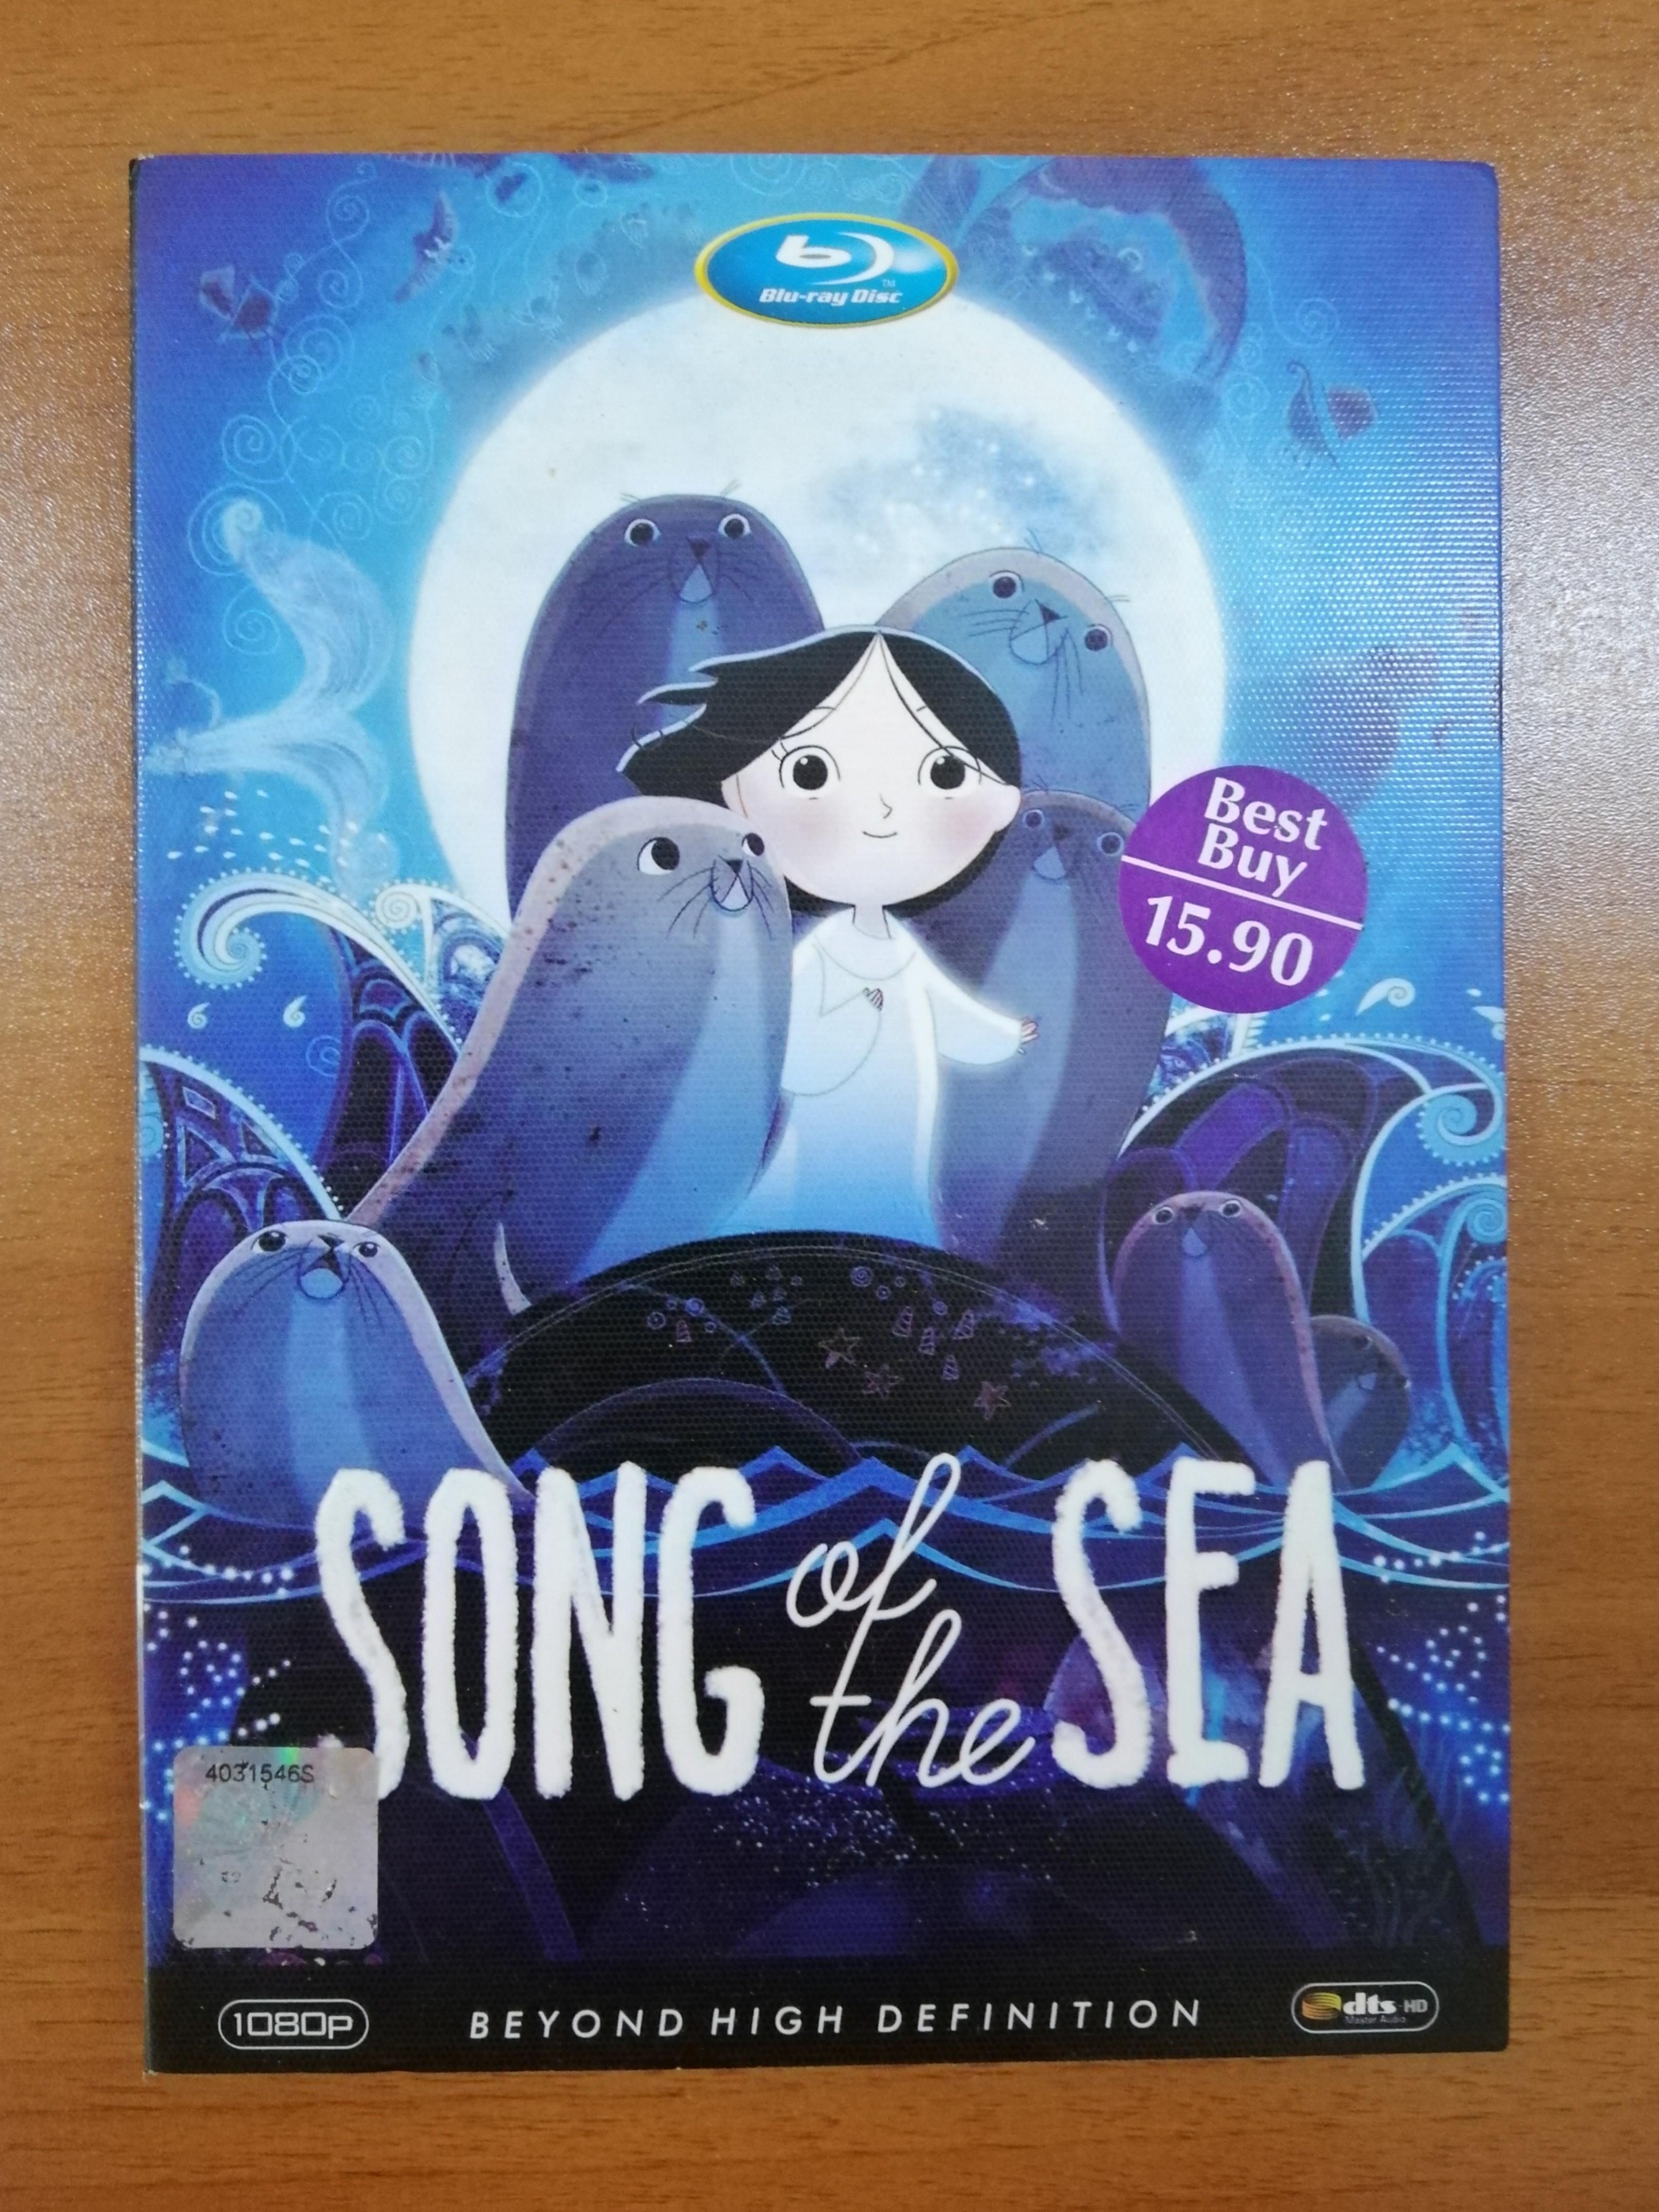 Song Of The Sea Blu Ray Disc Dvd Music Media Cd S Dvd S Other Media On Carousell